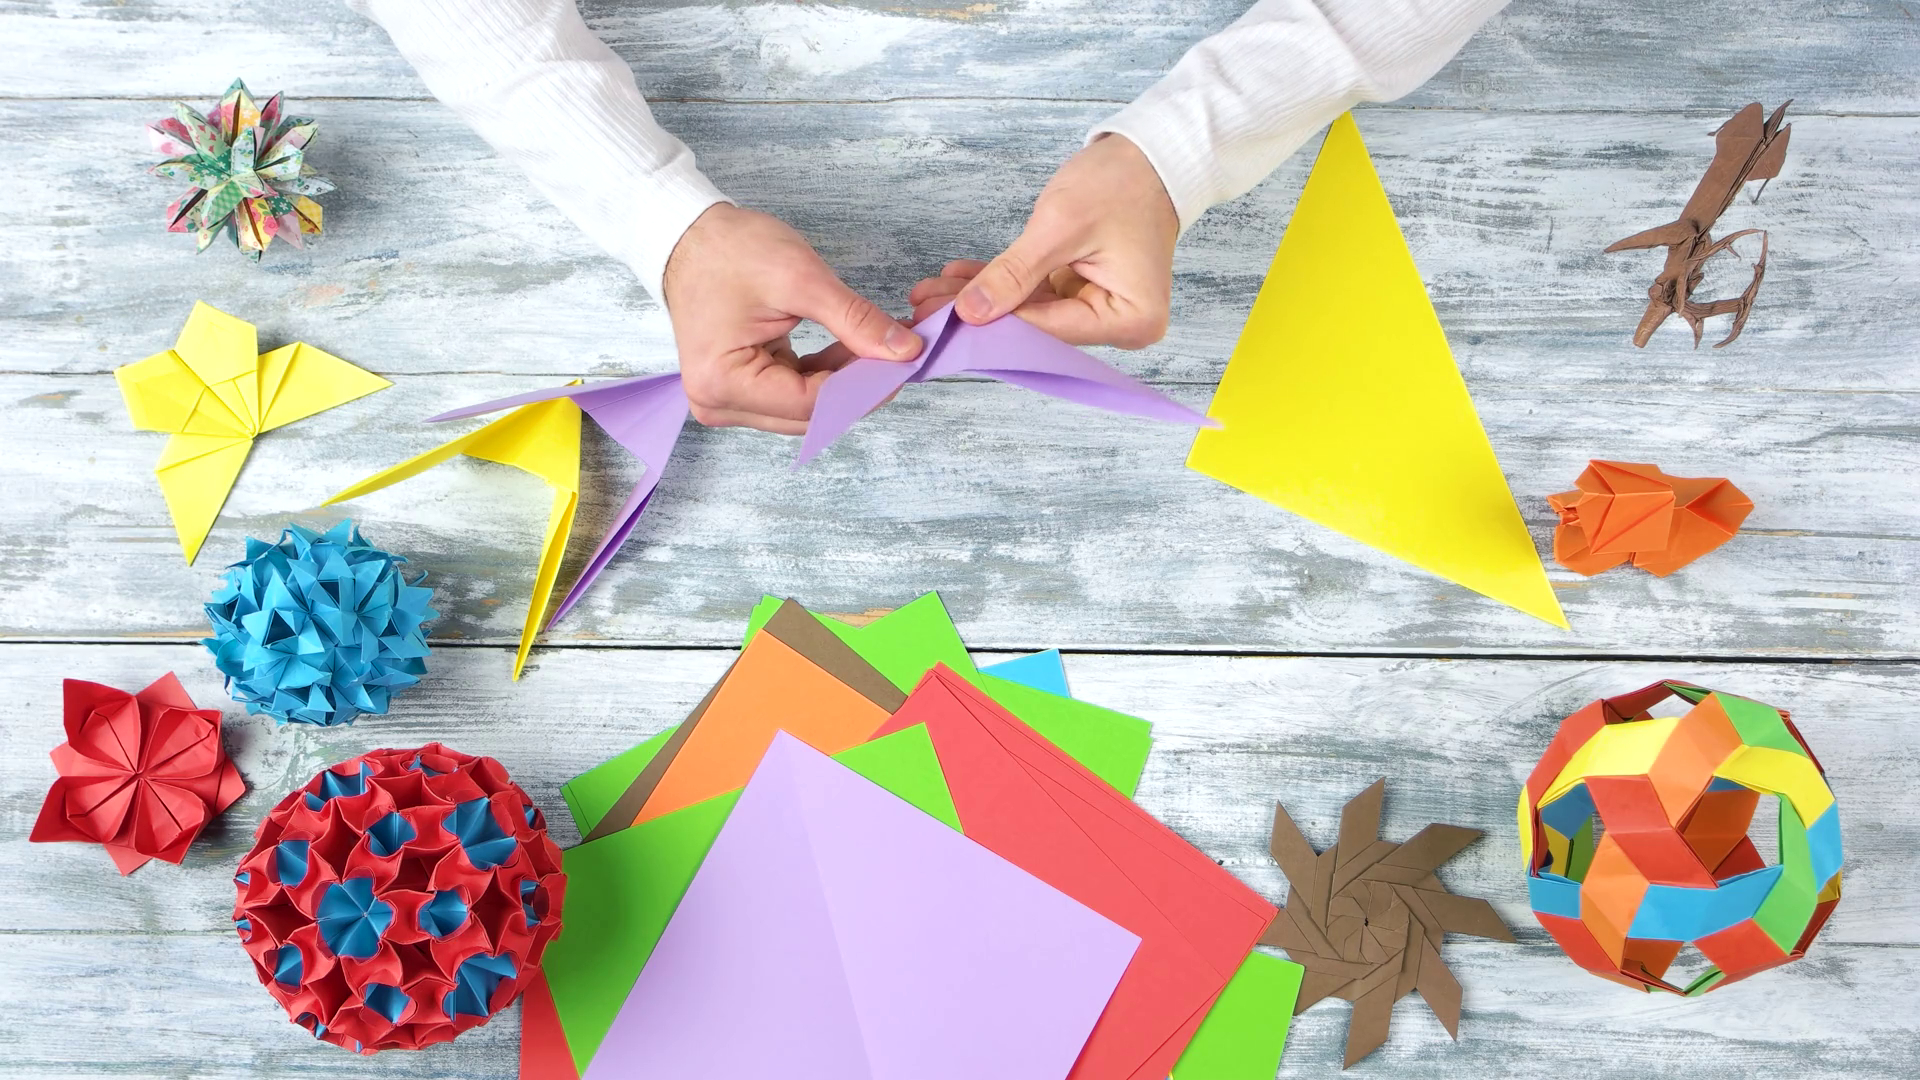 How To Make A Origami Person Hands Doing Origami Swallows Person Making Plane From Colorful Paper How To Fold A Super Easy And Quick Origami Birds